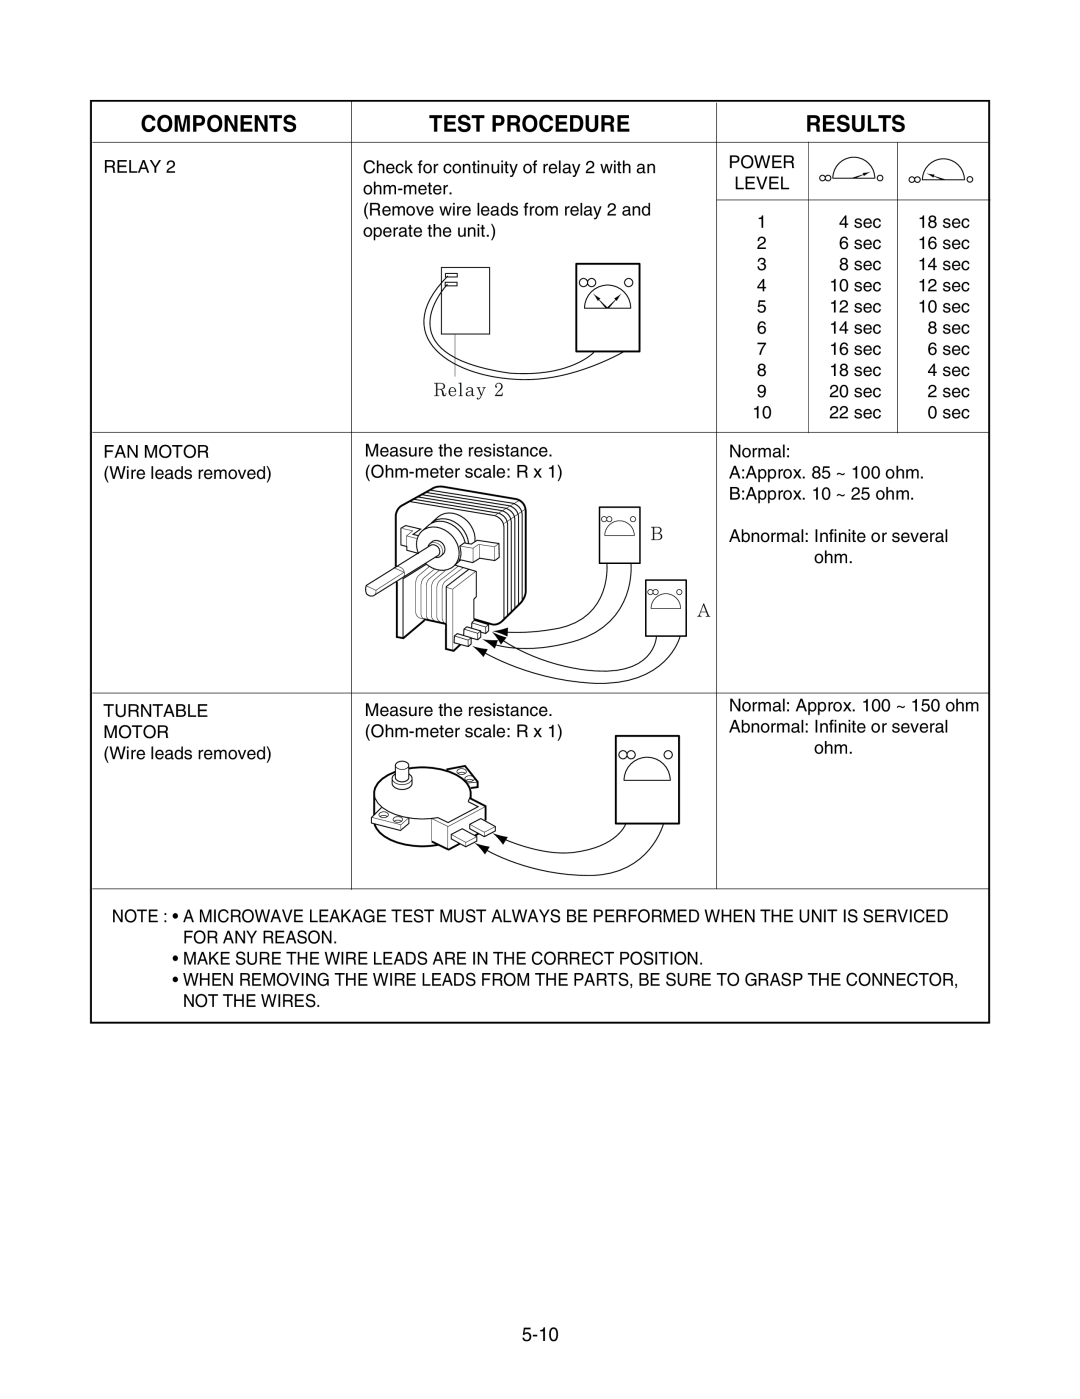 GE LMAB1240ST service manual 5-10, Components, Test Procedure, Results 